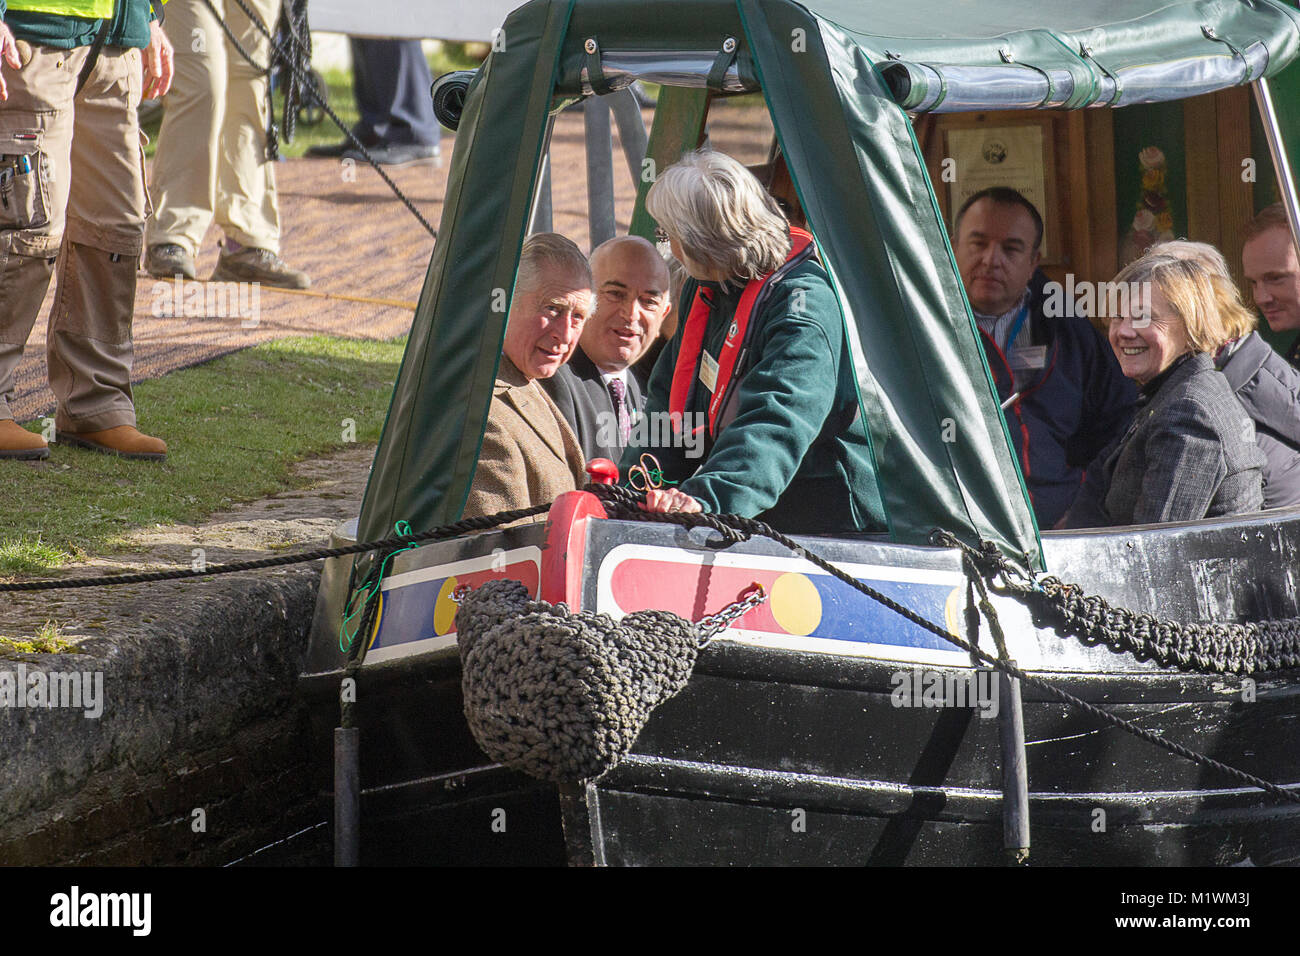 Stroud, Gloucestershire, UK. 2nd February, 2018. HRH The Prince of Wales on board the narrow boat Perseverance at Wallbridge Lock, Stroud, UK. Prince Charles visited to officially open the newly restored Wallbridge Lower Lock, part of the Cotswold Canals Project. Picture: Carl Hewlett/Alamy Live News Stock Photo